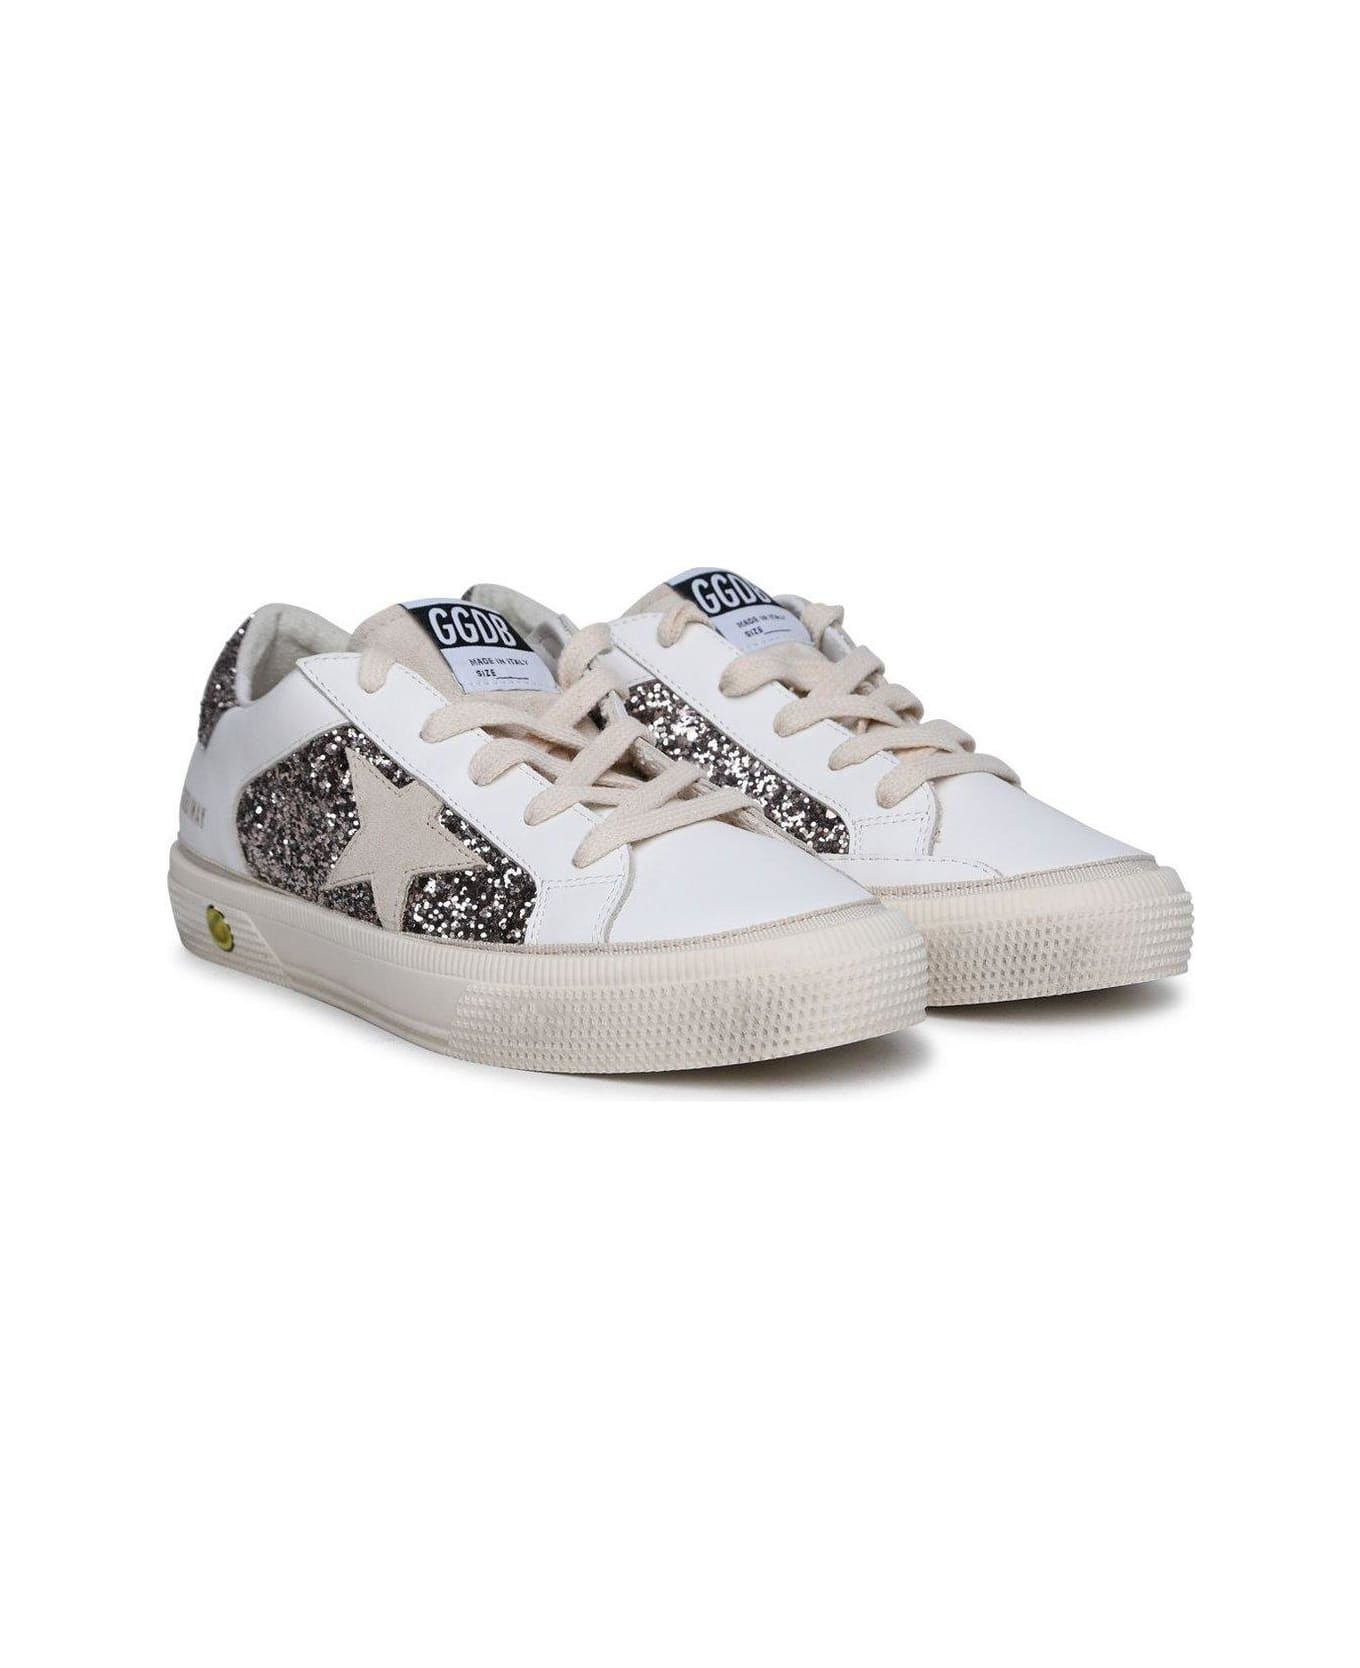 Golden Goose N May Star Glittered Sneakers - White Cinder Seed